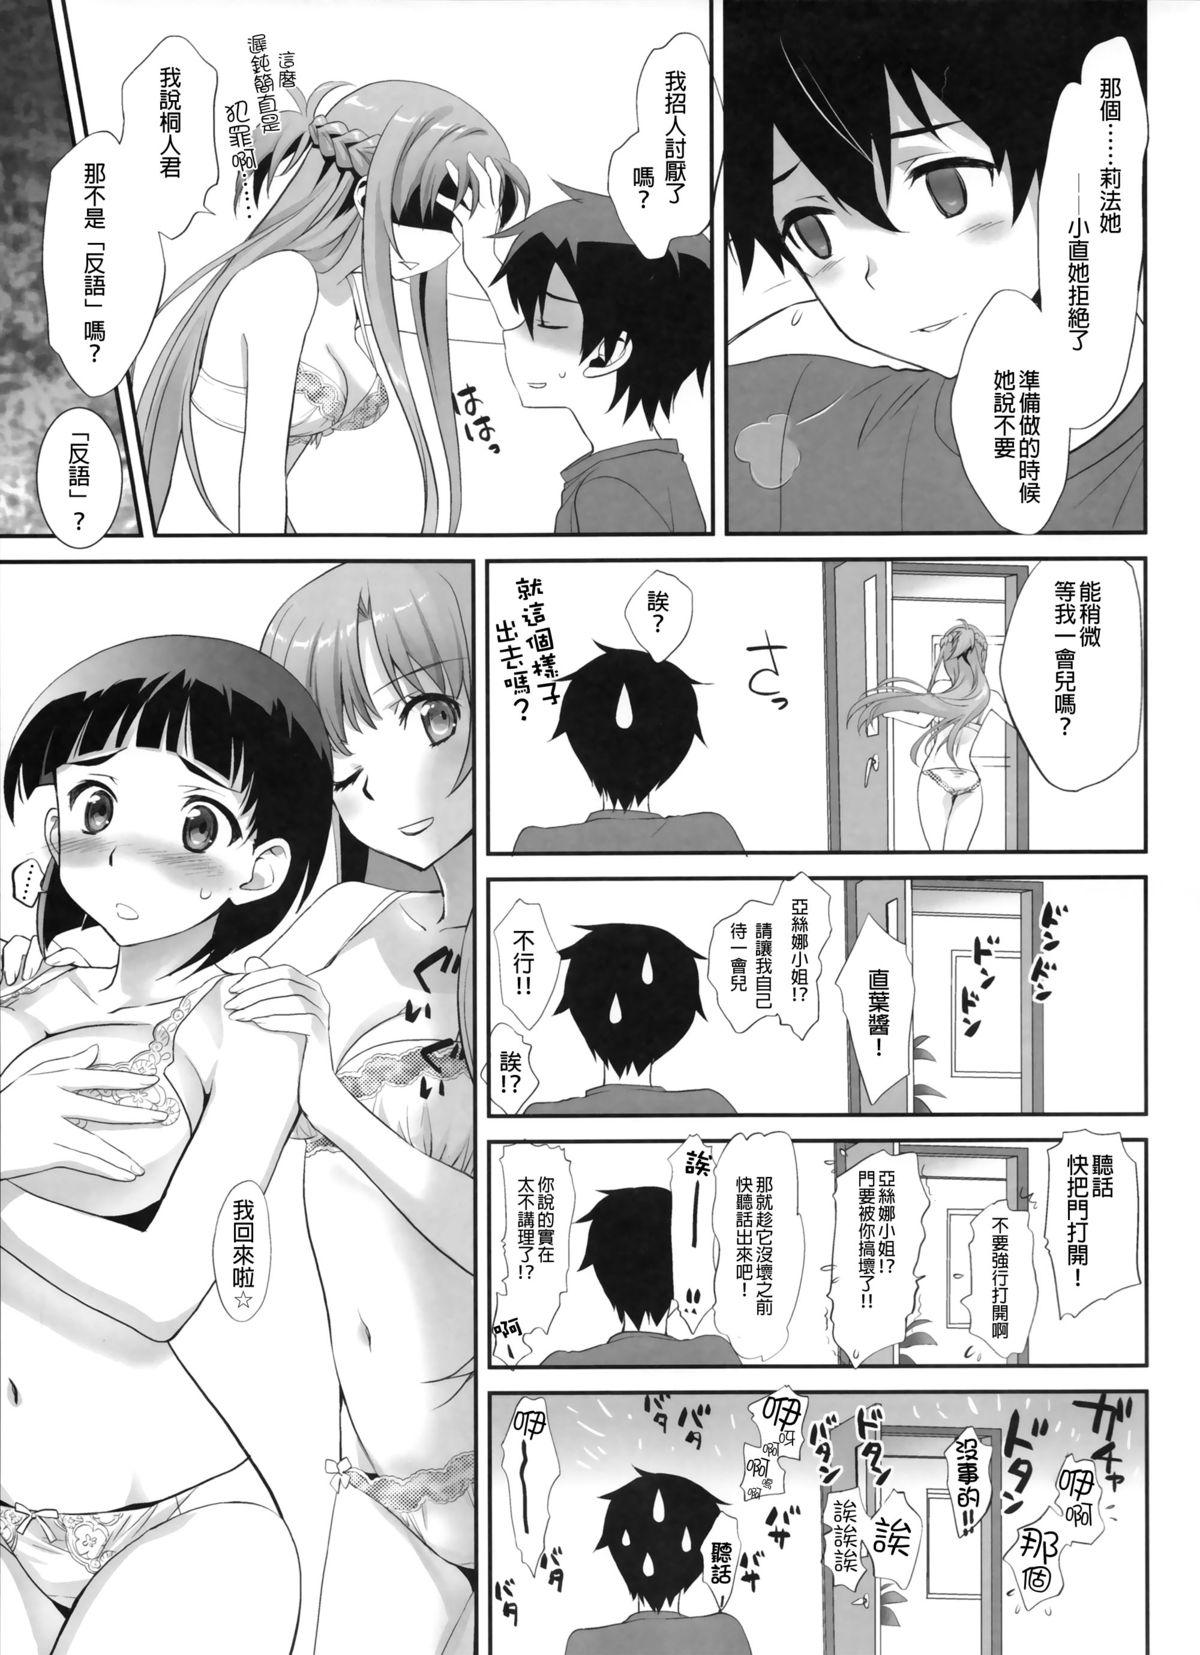 Stepsis Sunny-side up? - Sword art online Point Of View - Page 13